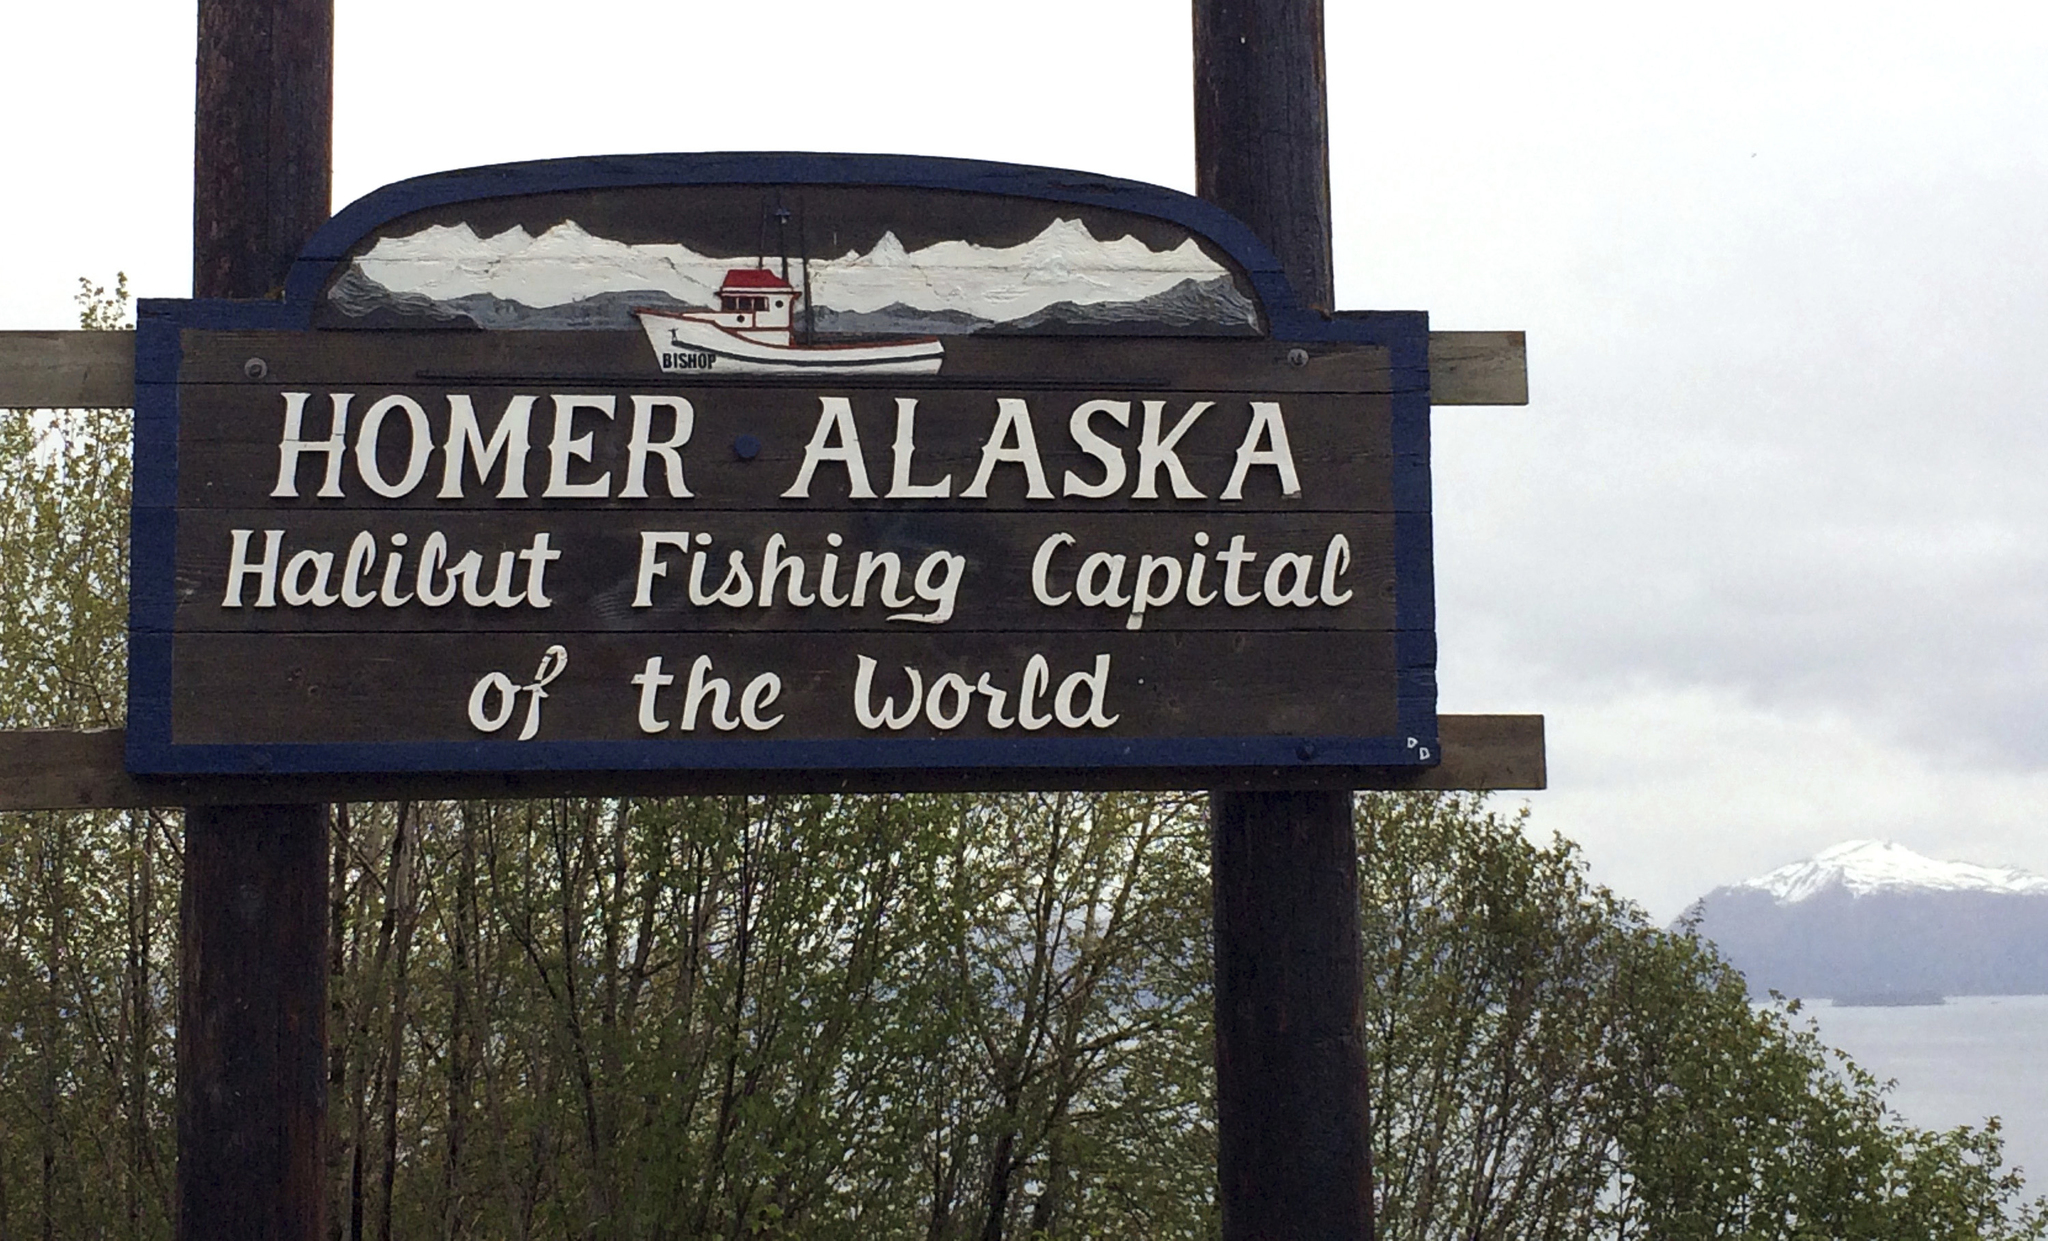 In this May 23, 2015, photo the welcome sign is displayed on the outskirts of Homer, Alaska. The fishing town is the latest U.S. city to consider affirming its commitment to inclusion amid national concerns about the treatment of immigrants, religious minorities and others. Homer city leaders are expected to weigh a resolution Monday that says Homer will resist any efforts to profile “vulnerable populations.” (AP Photo/Mark Thiessen)